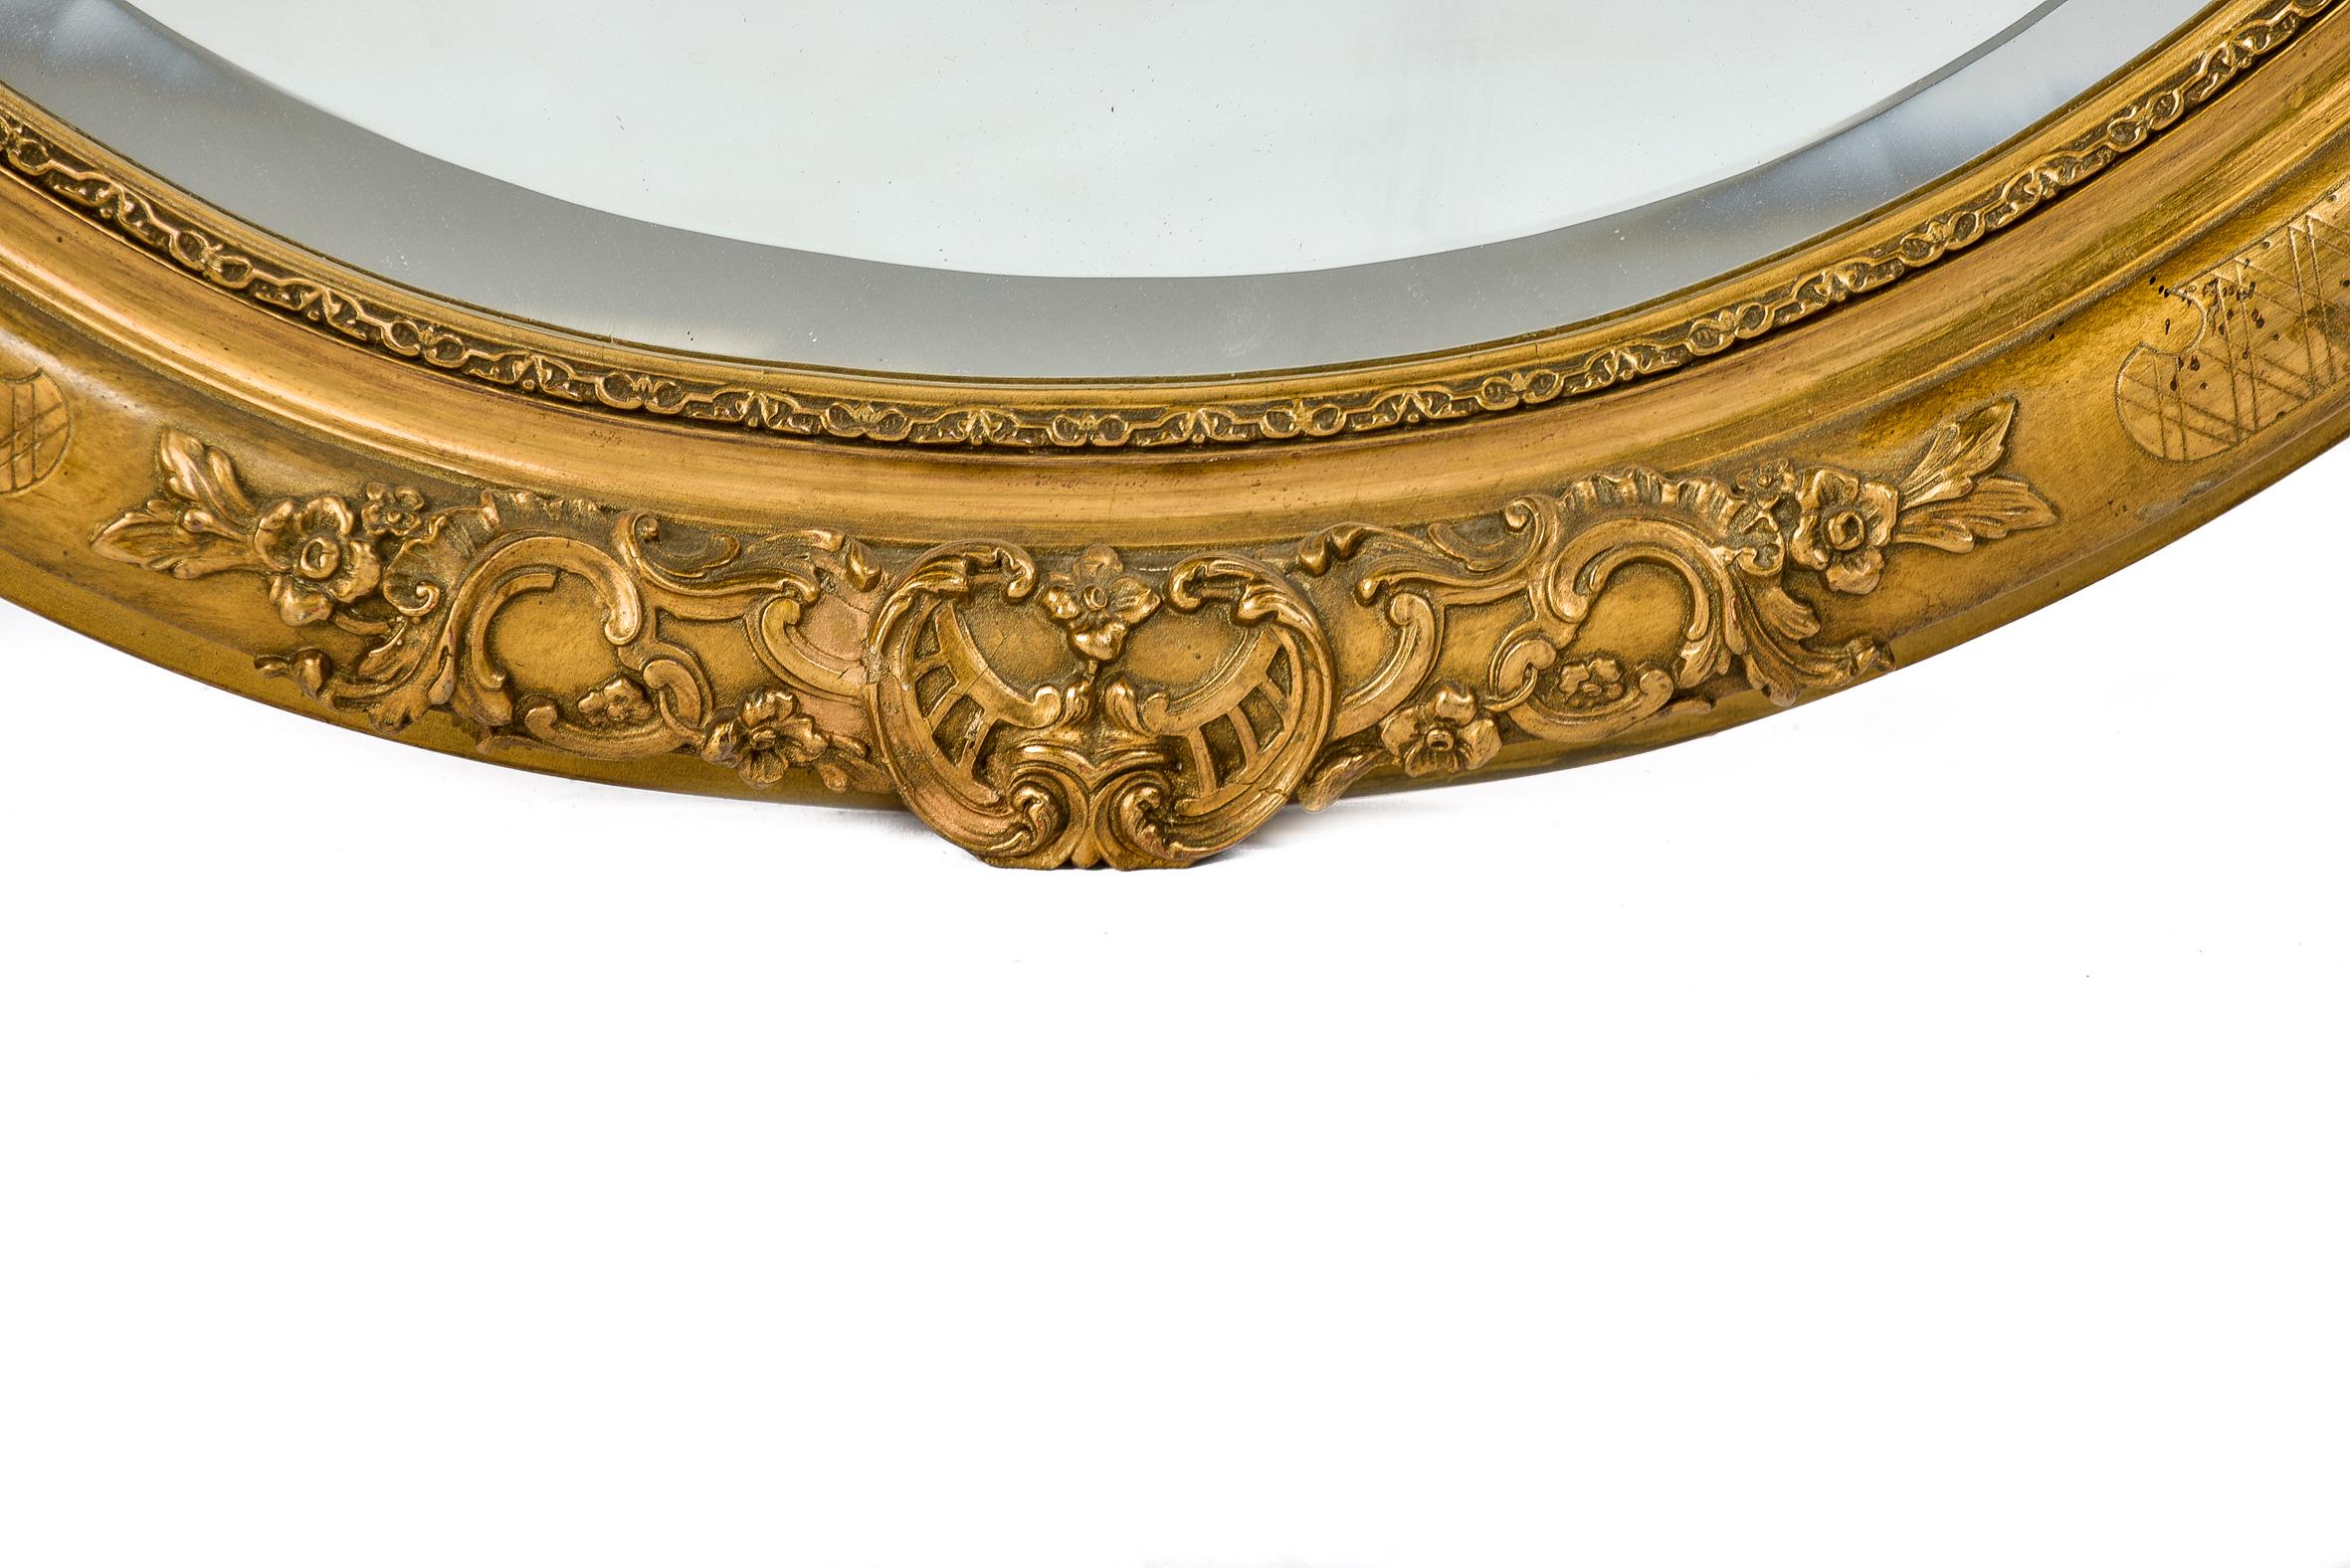 Gesso Antique 19th Century French Oval Gold Leaf Gilt Mirror with Faceted Glass